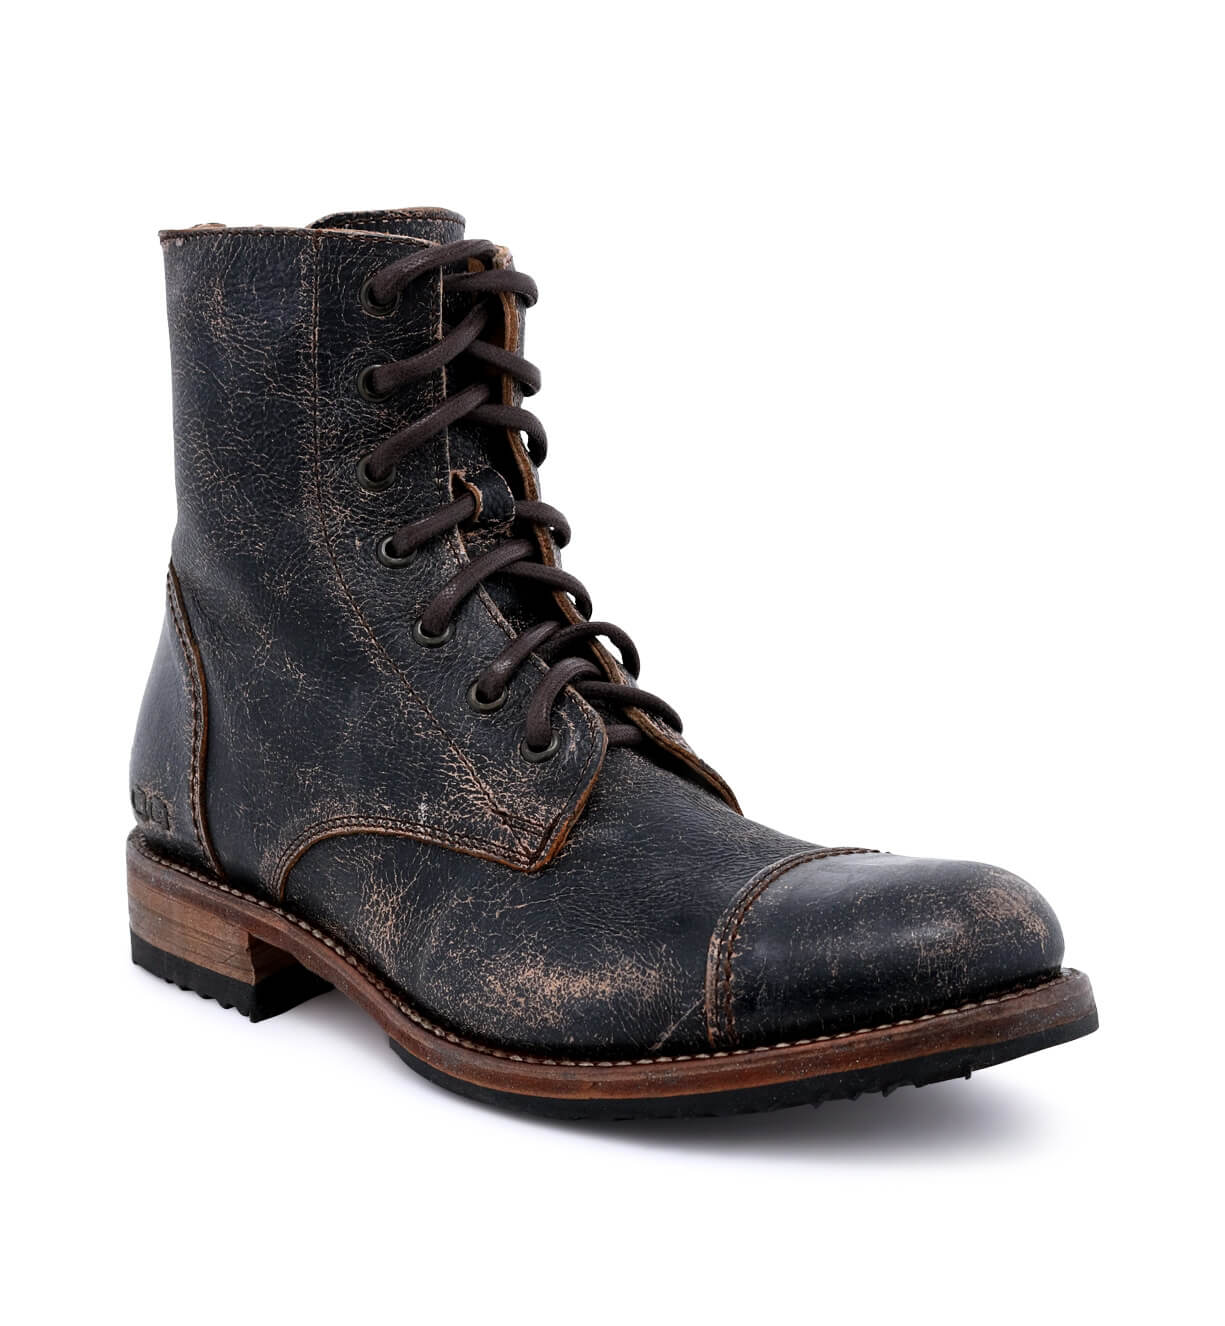 Bed Stu Protege distressed black boots with a leather sole.